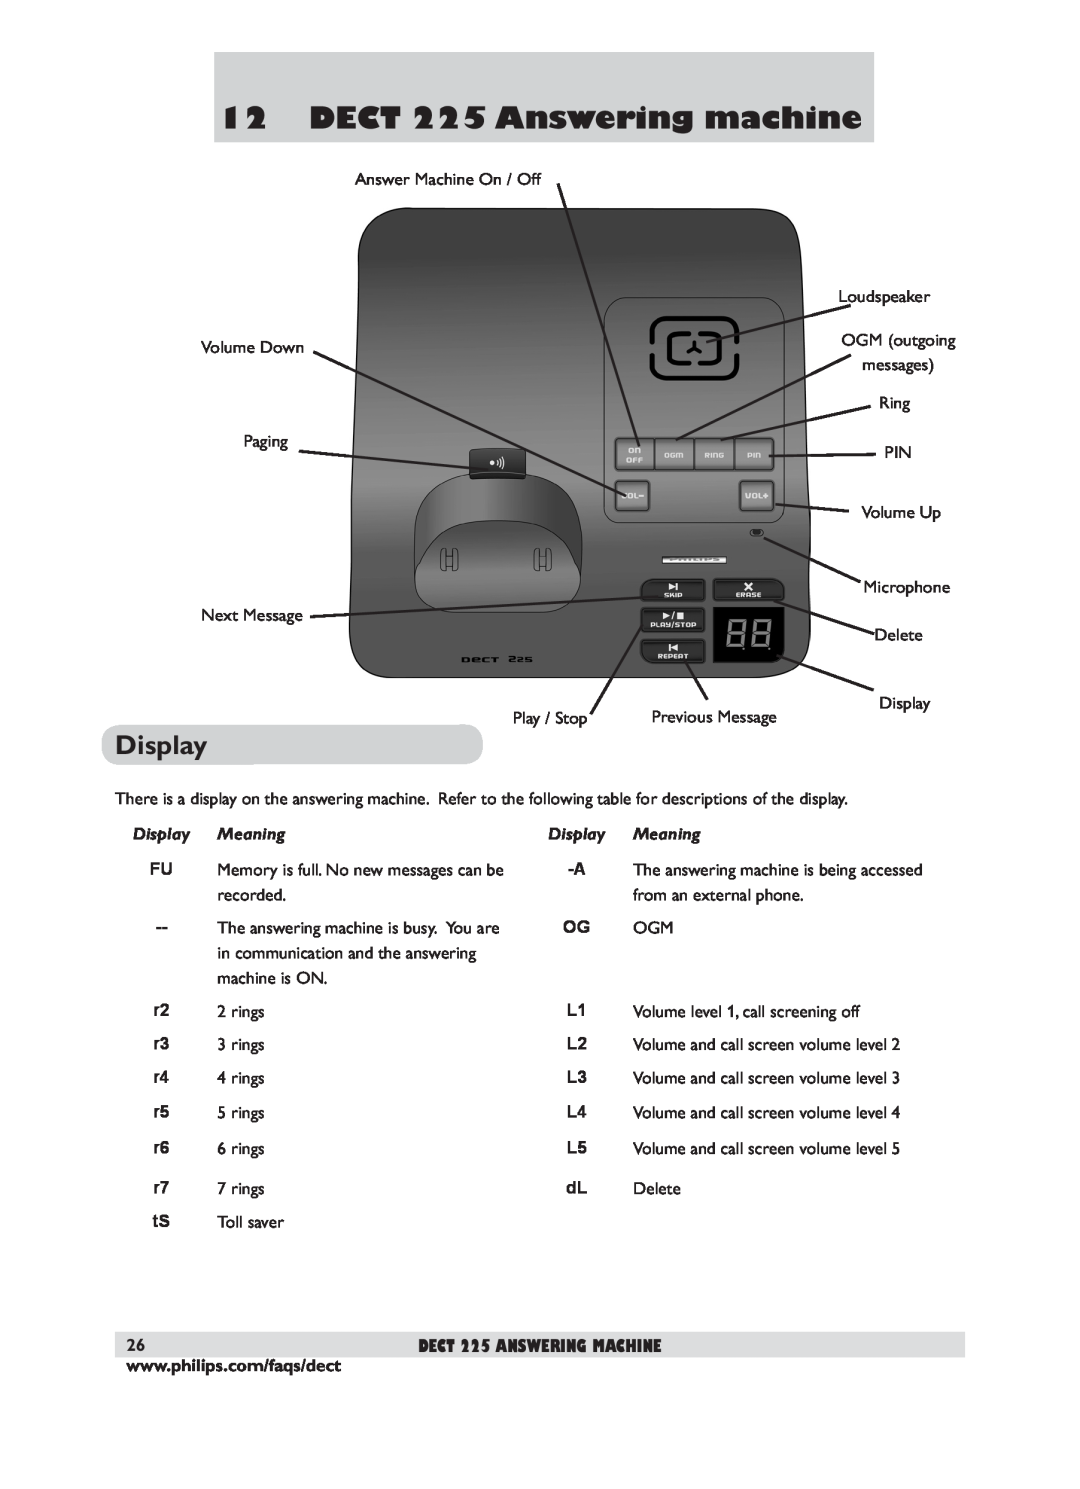 Philips DECT 221 user manual DECT 225 Answering machine, Display, Meaning, DECT 225 Answering Machine 